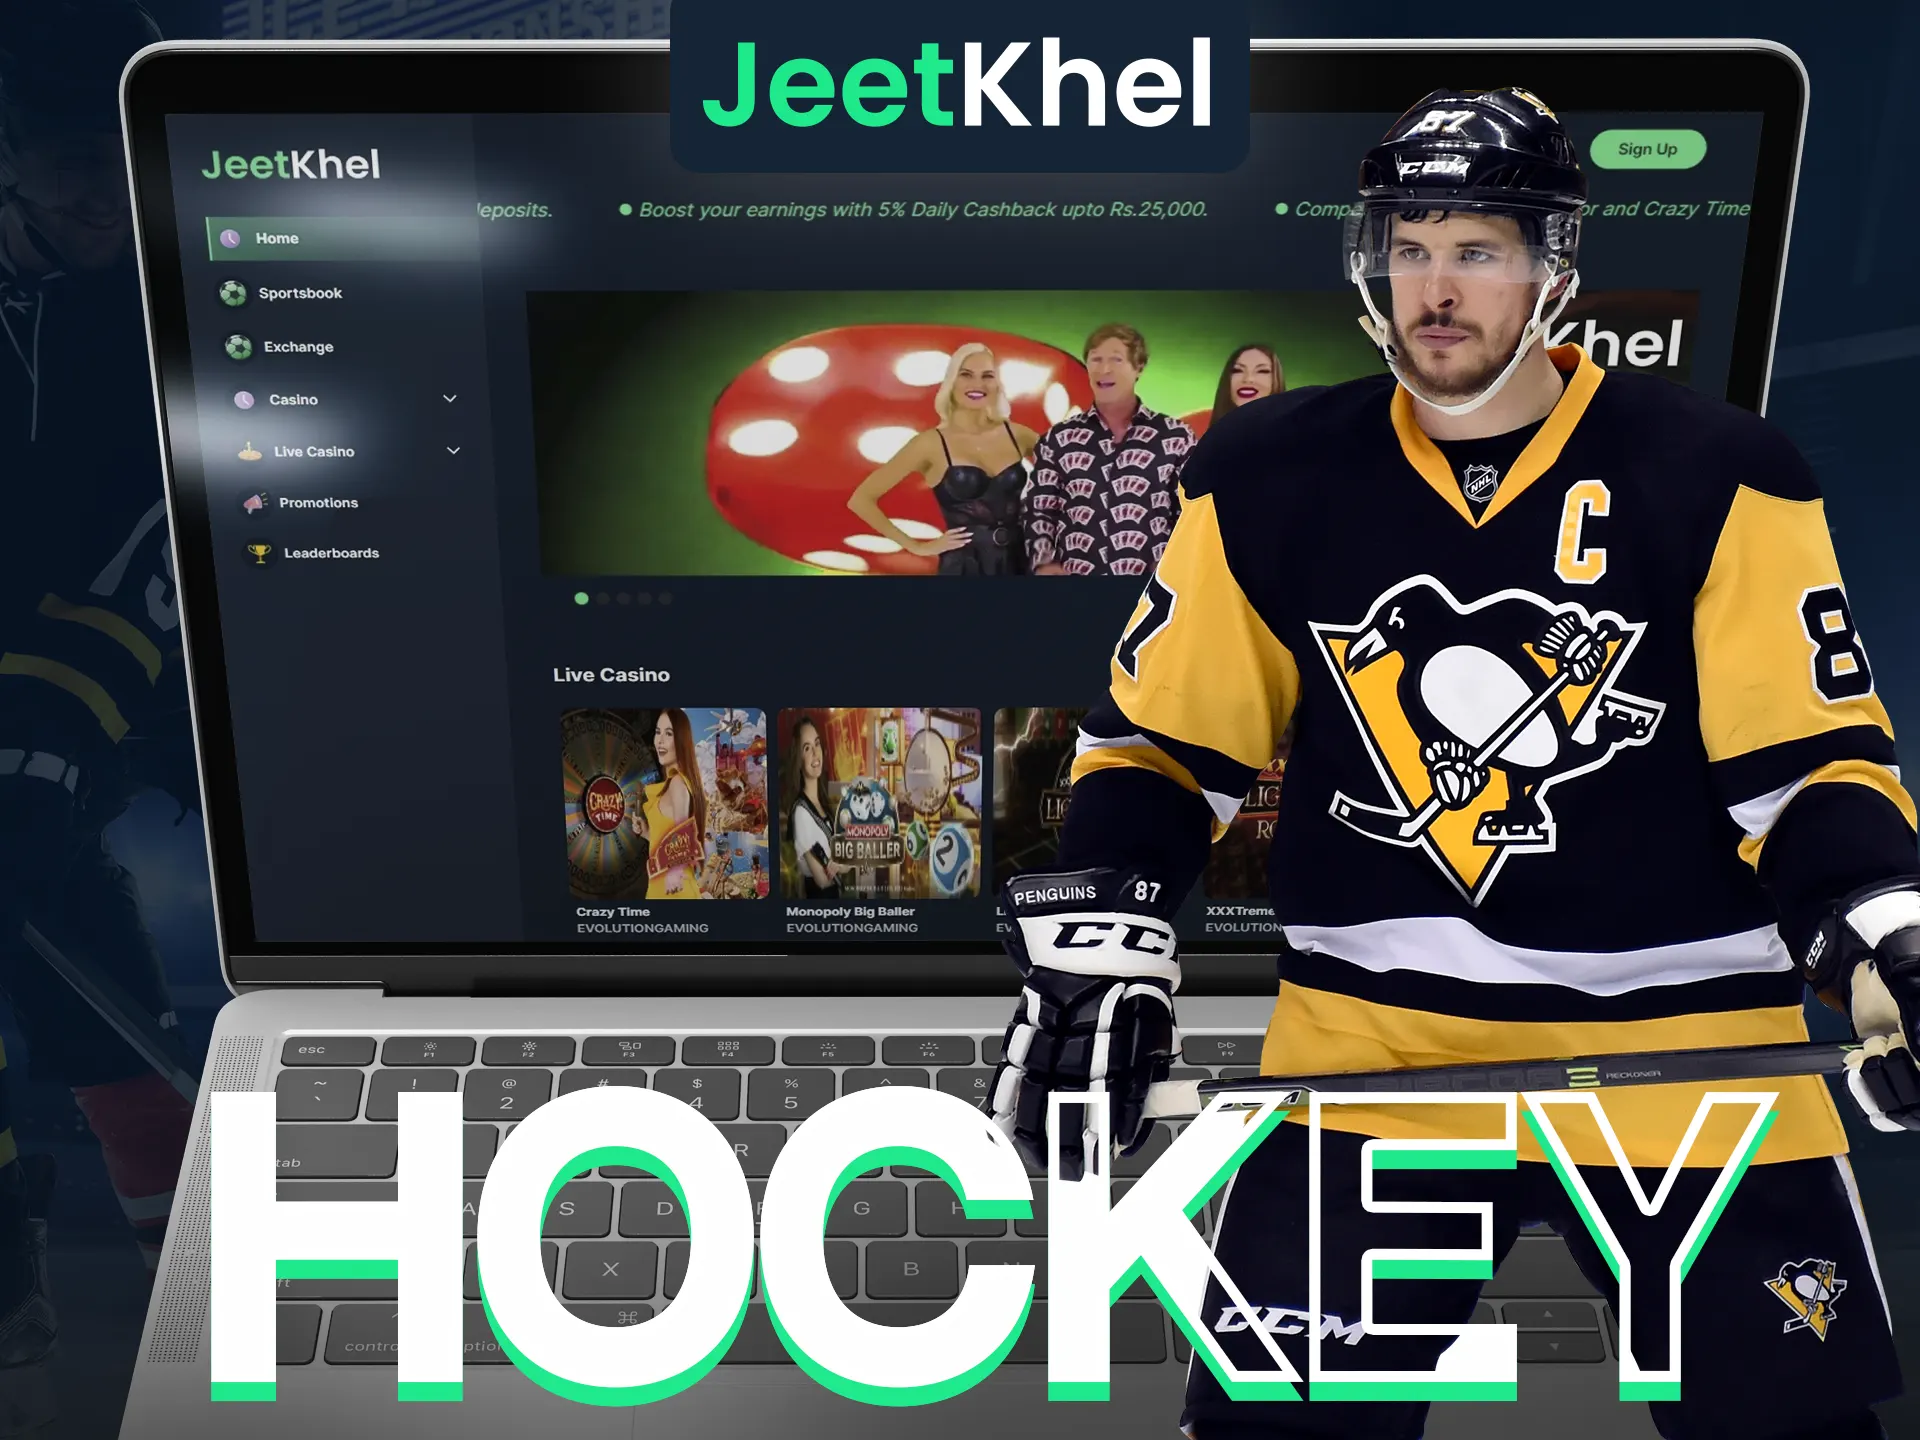 Place your hockey bets with Jeetkheel.